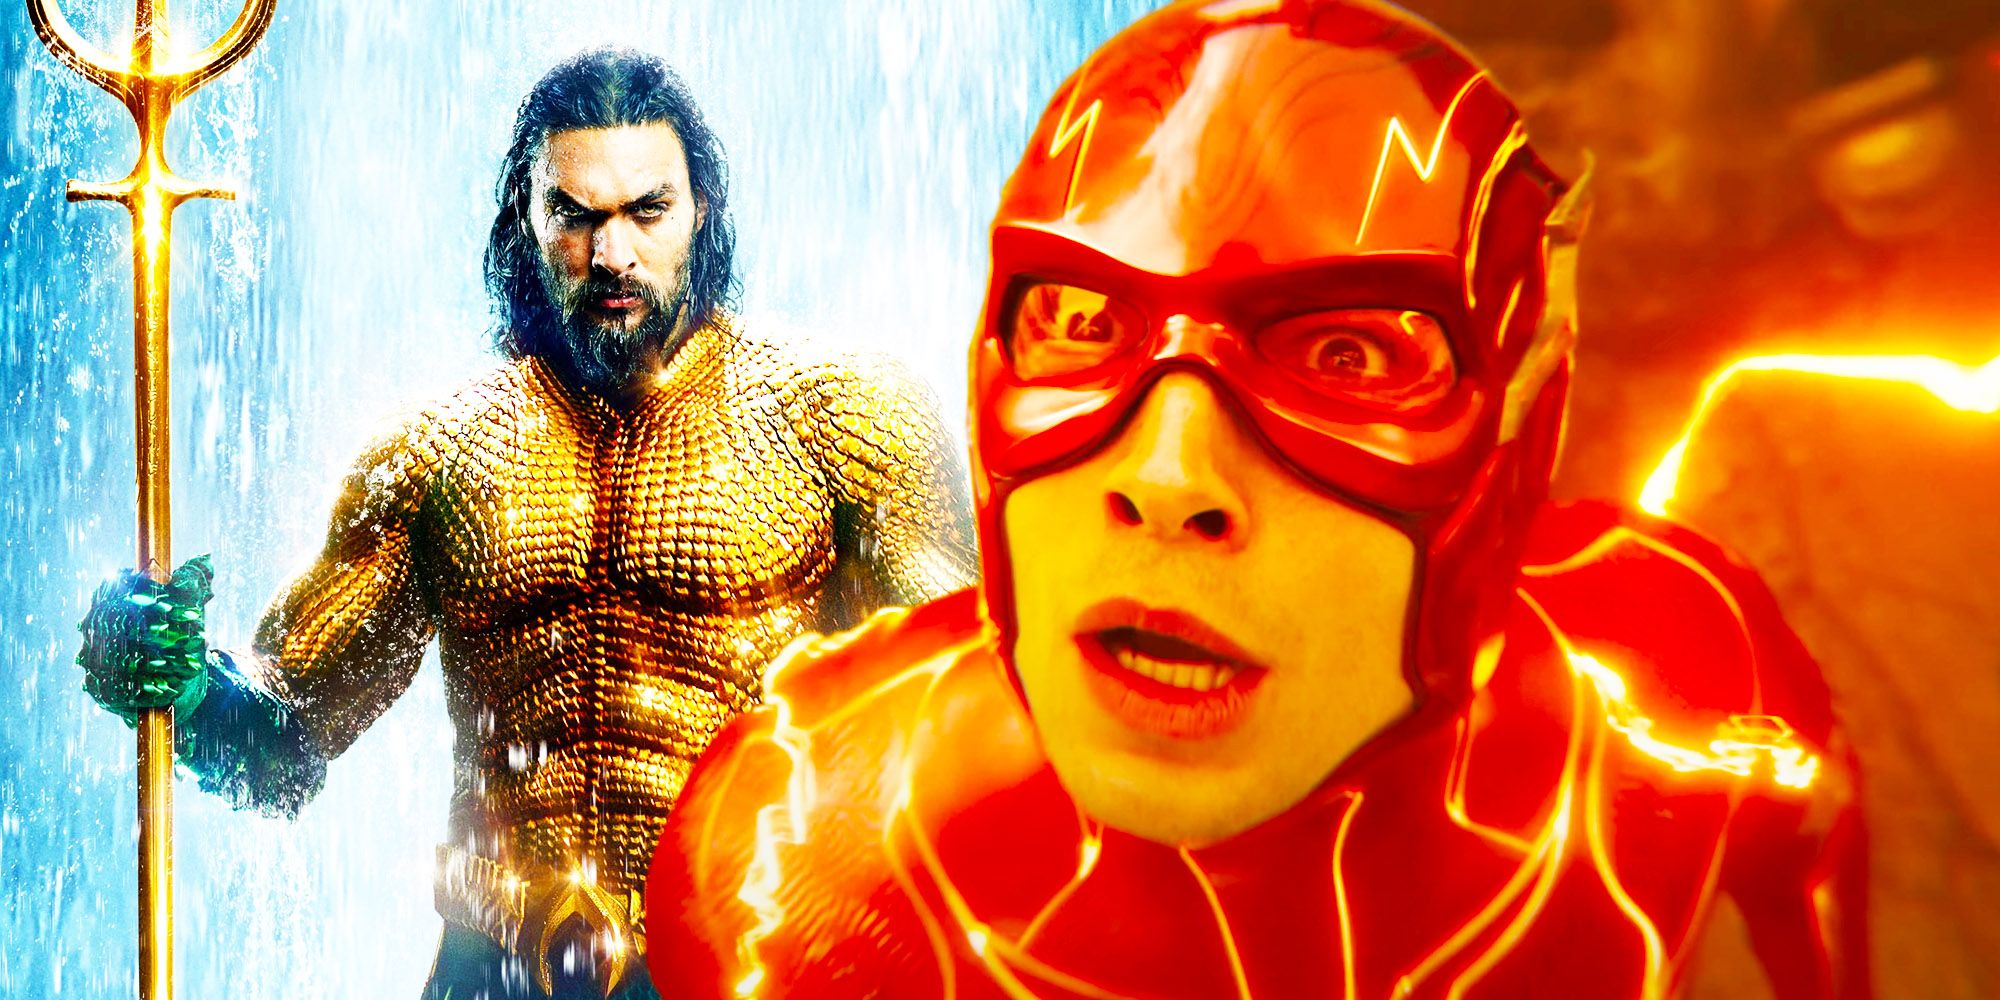 Jason Momoa's Aquaman in his iconic golden costume and Ezra Miller in The Flash looking surprised.